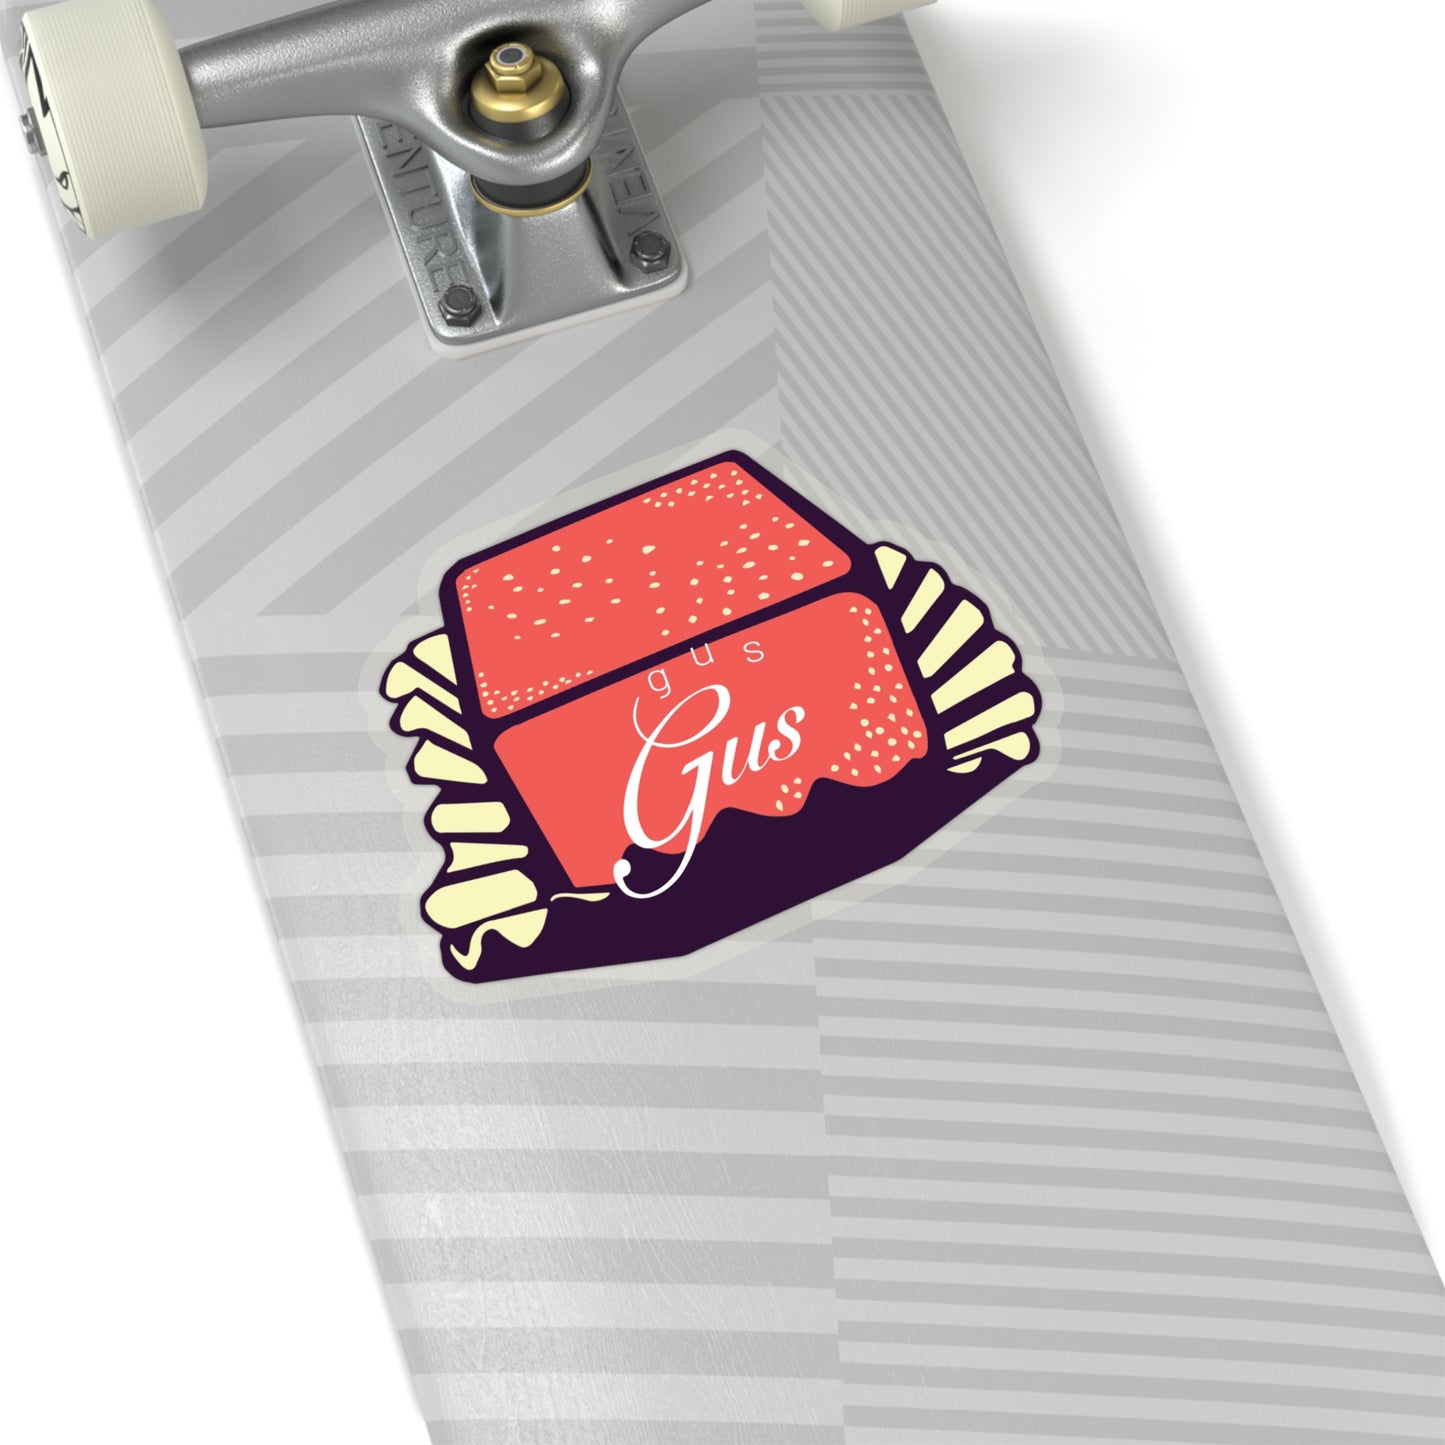 Gus Gus Jell-O Stickers (various sizes)